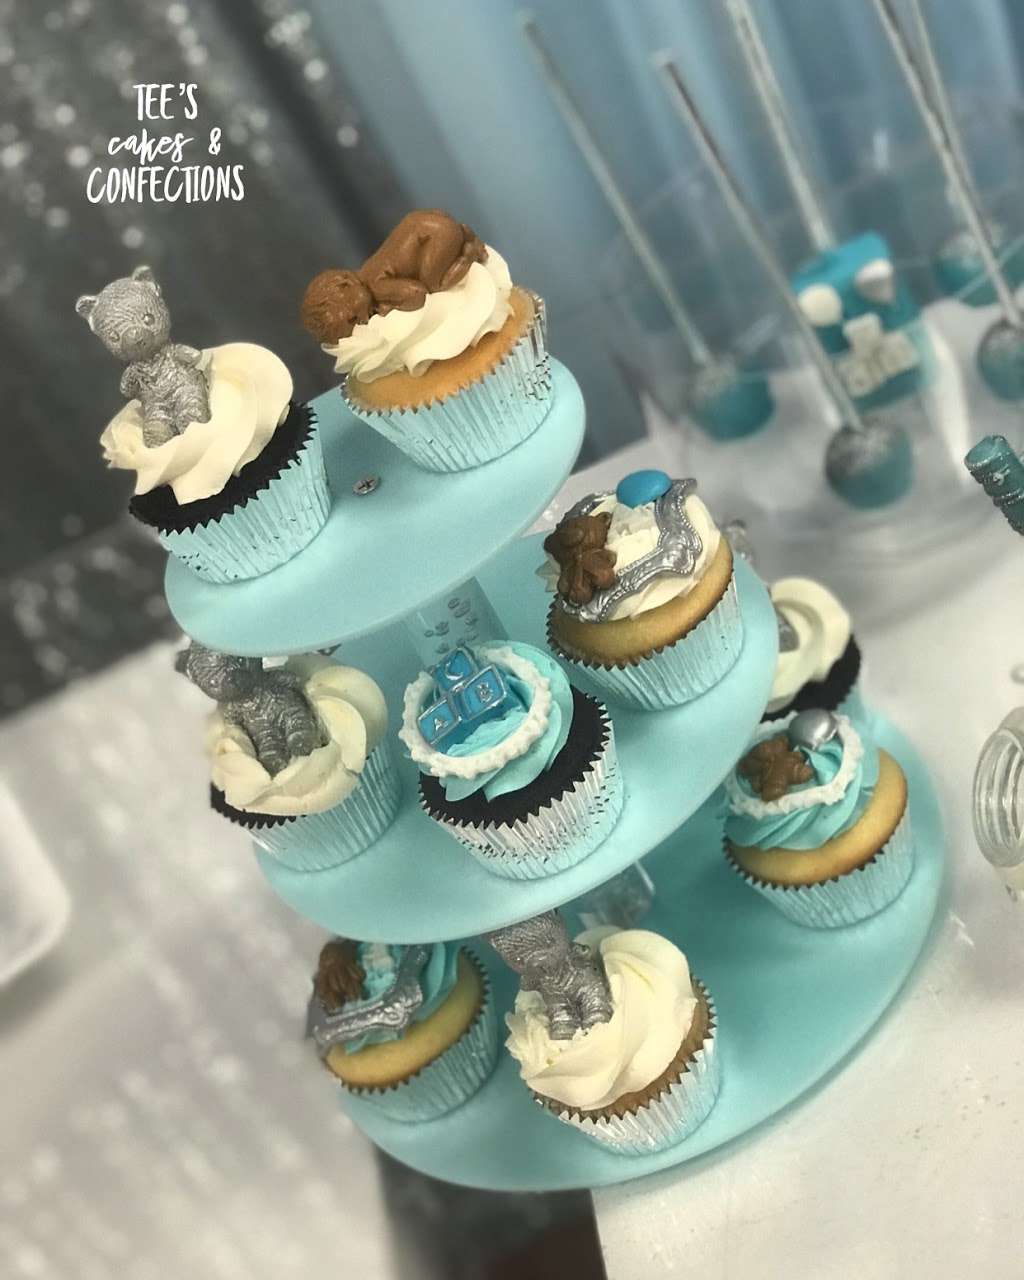 Tees Cakes and Confections | 16150 S Cicero Ave #8, Oak Forest, IL 60452 | Phone: (708) 465-1206